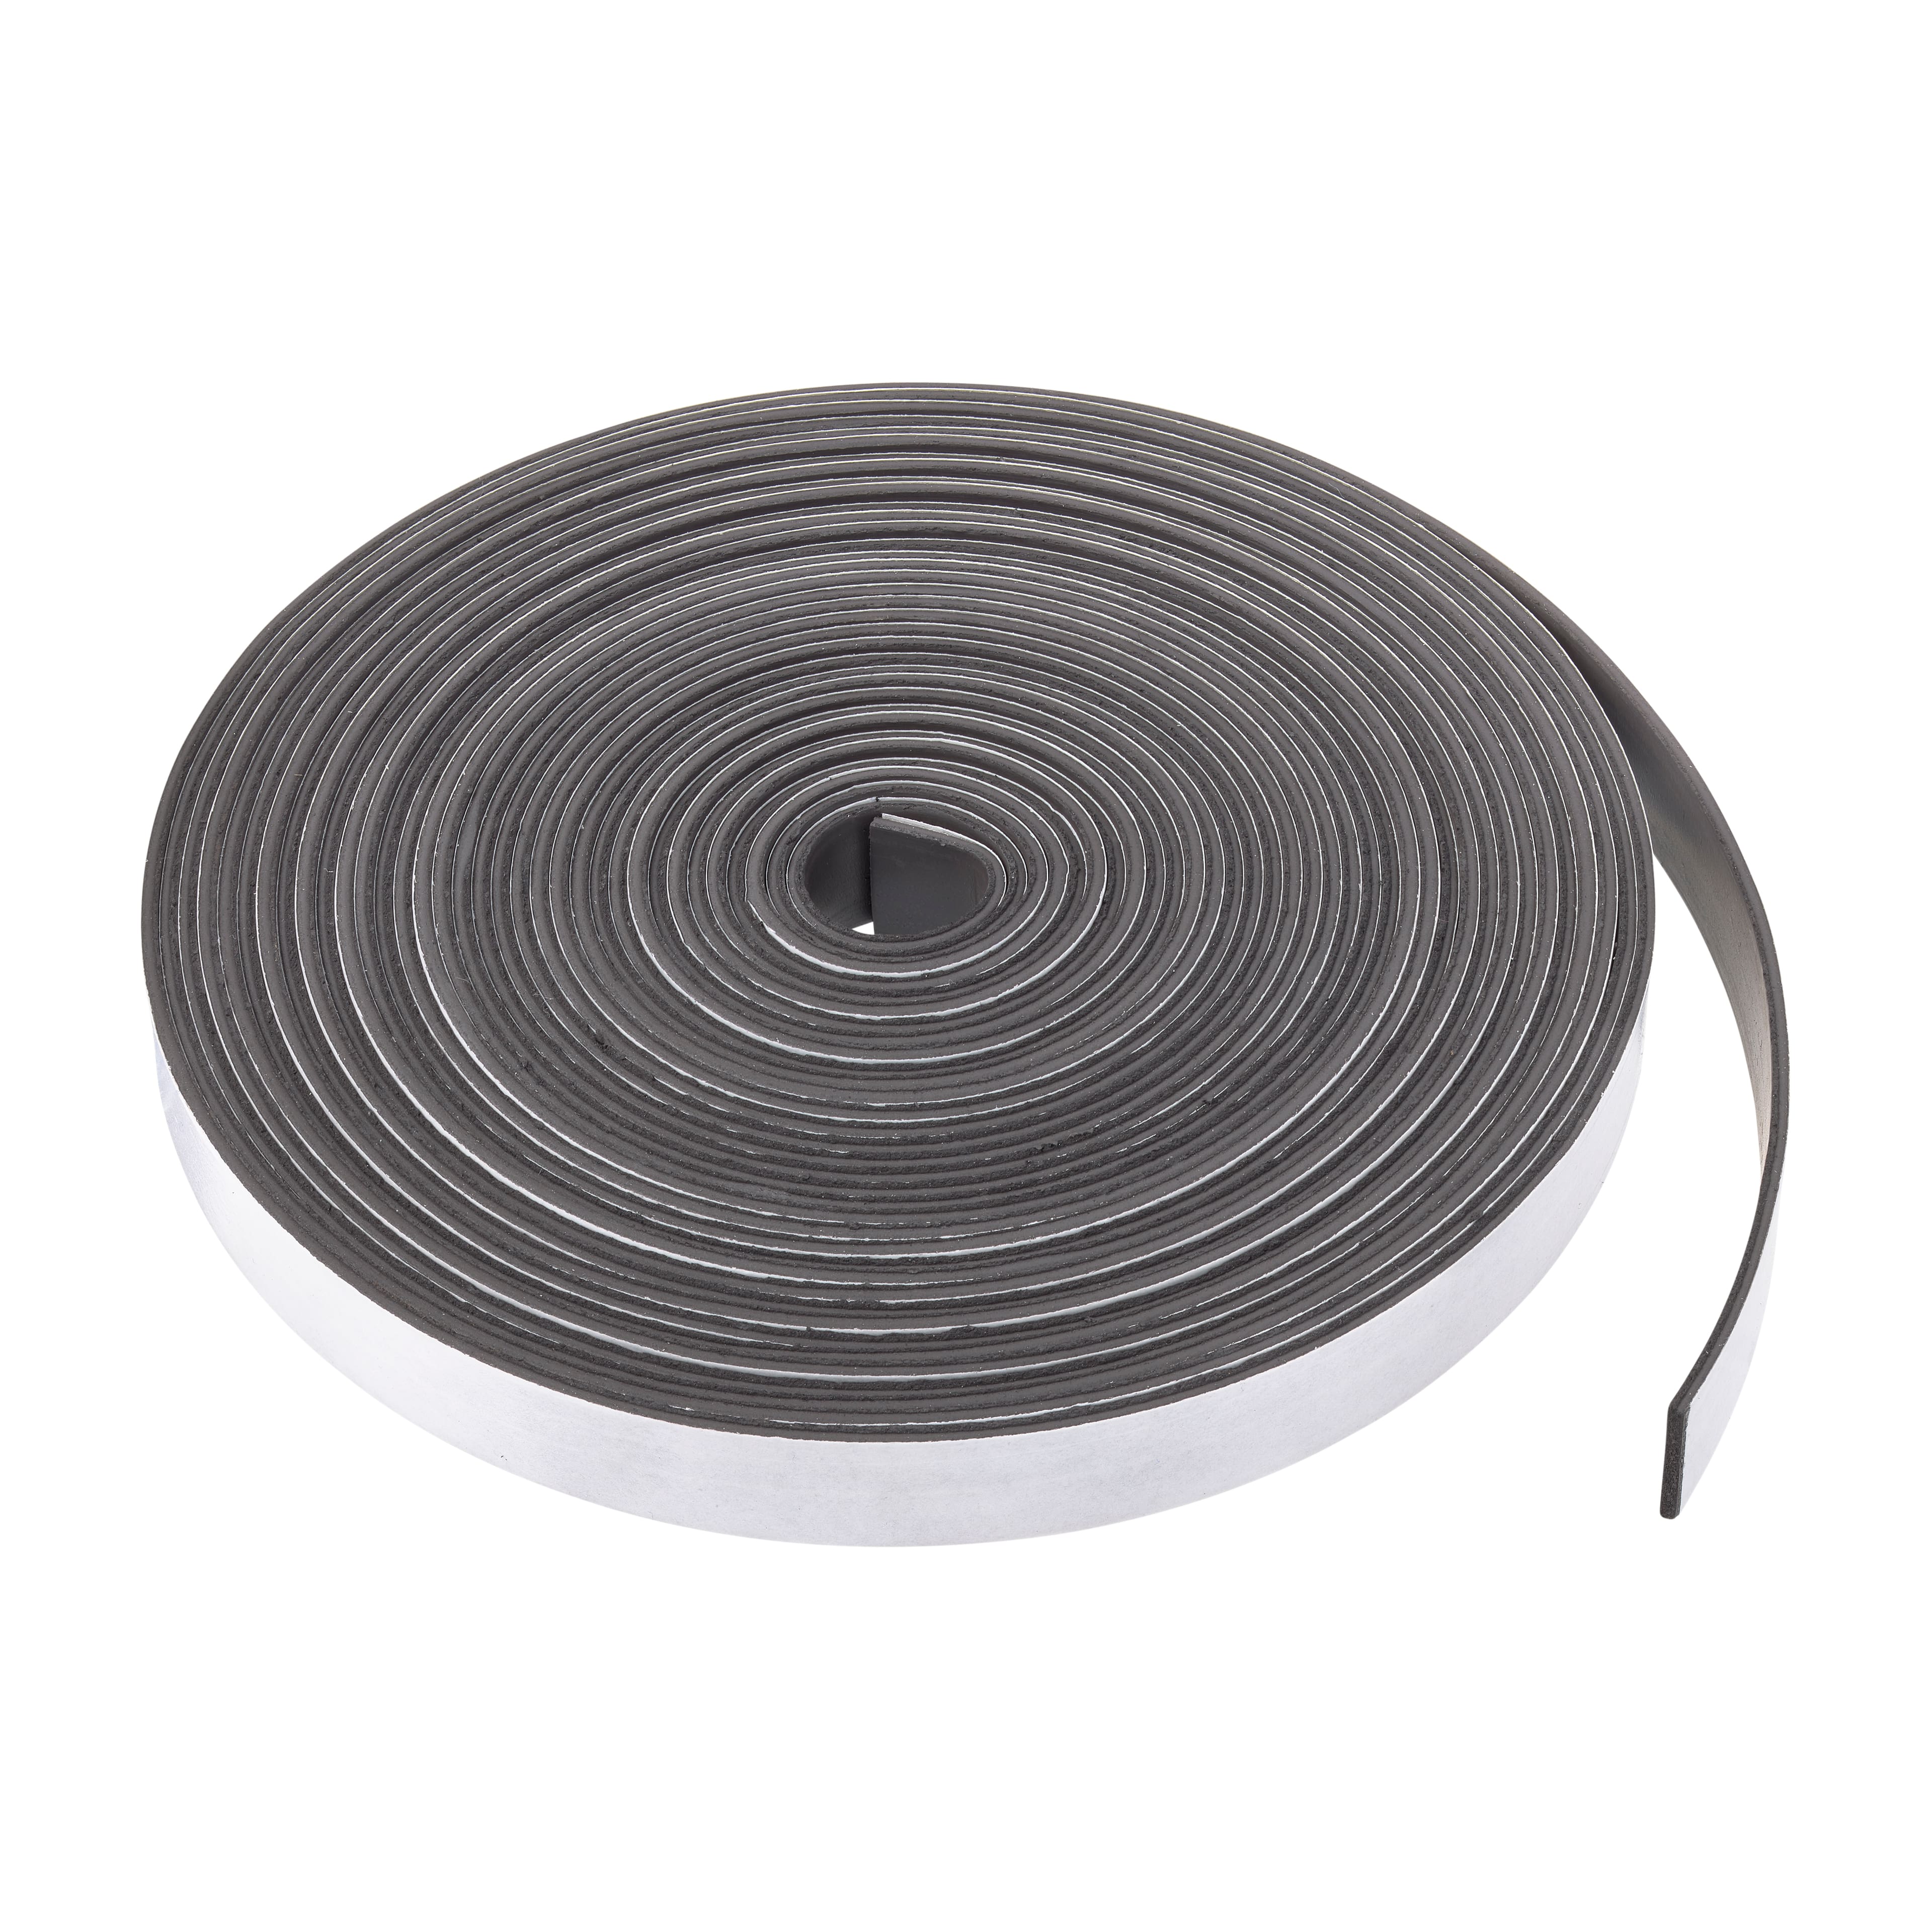 Strong Magnetic Tape with 3M Adhesive Backing - Magnosphere